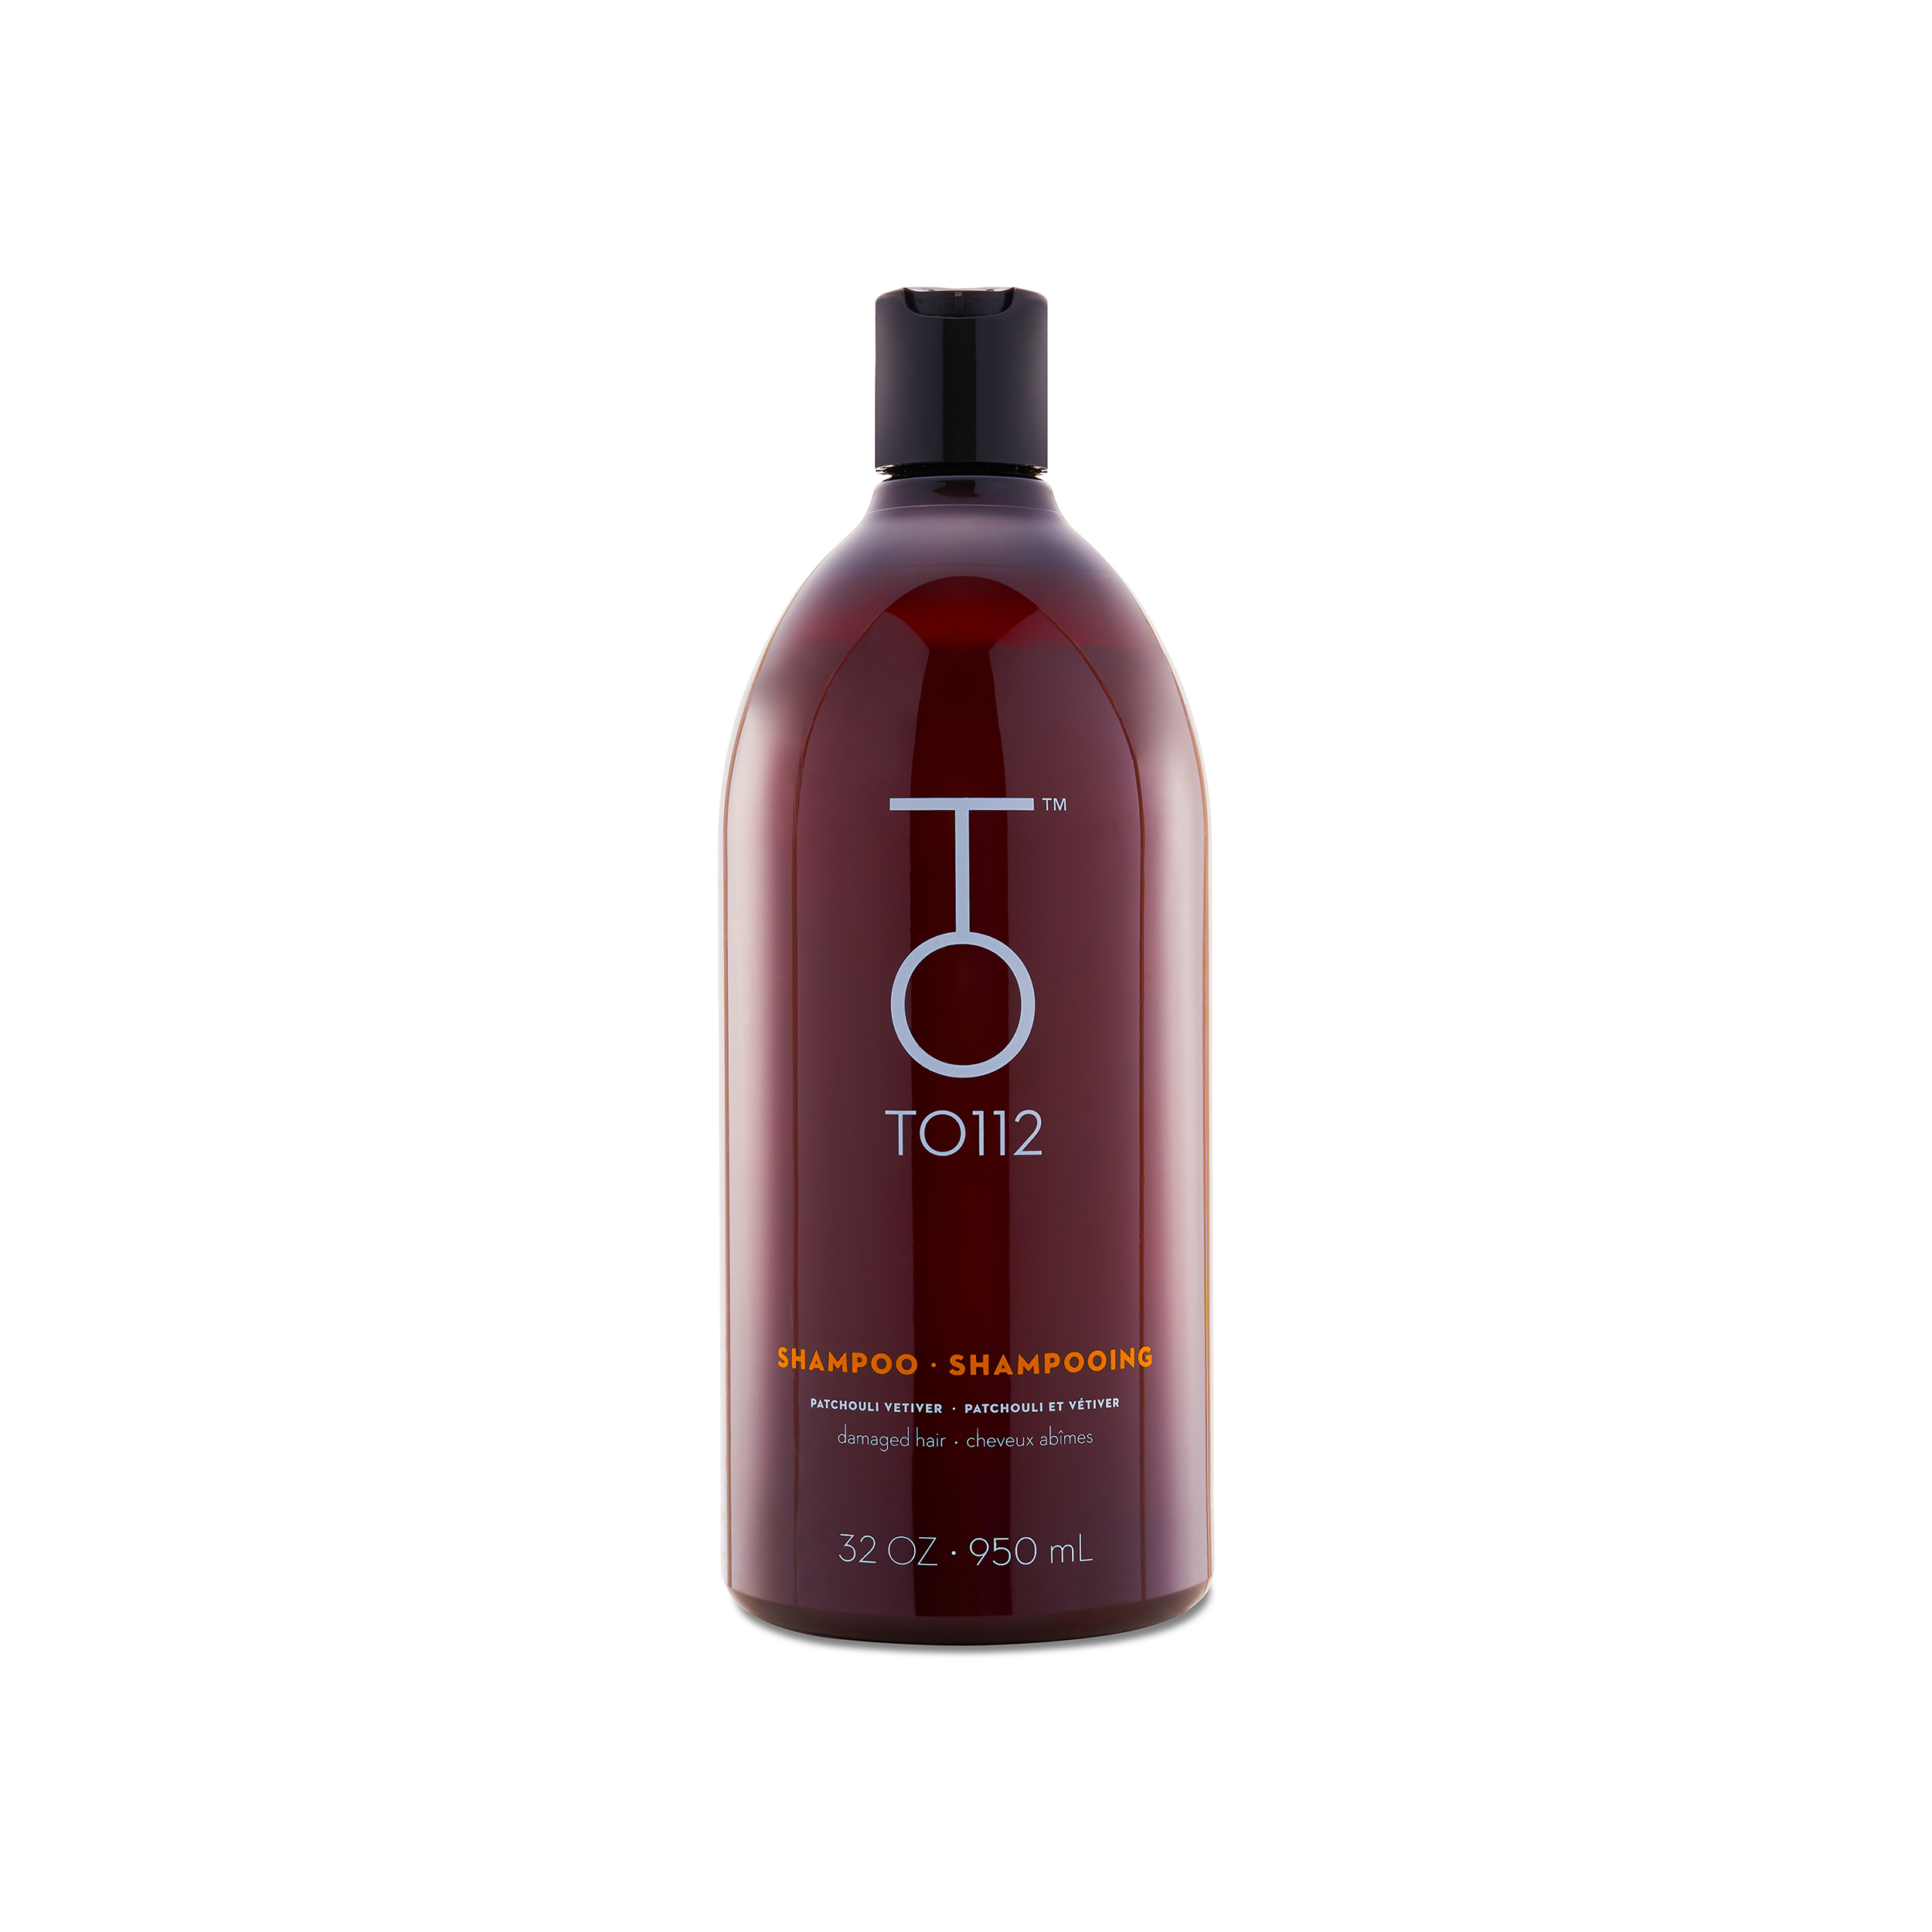 SHAMPOOING CHEVEUX ABIMES 950ML TO112